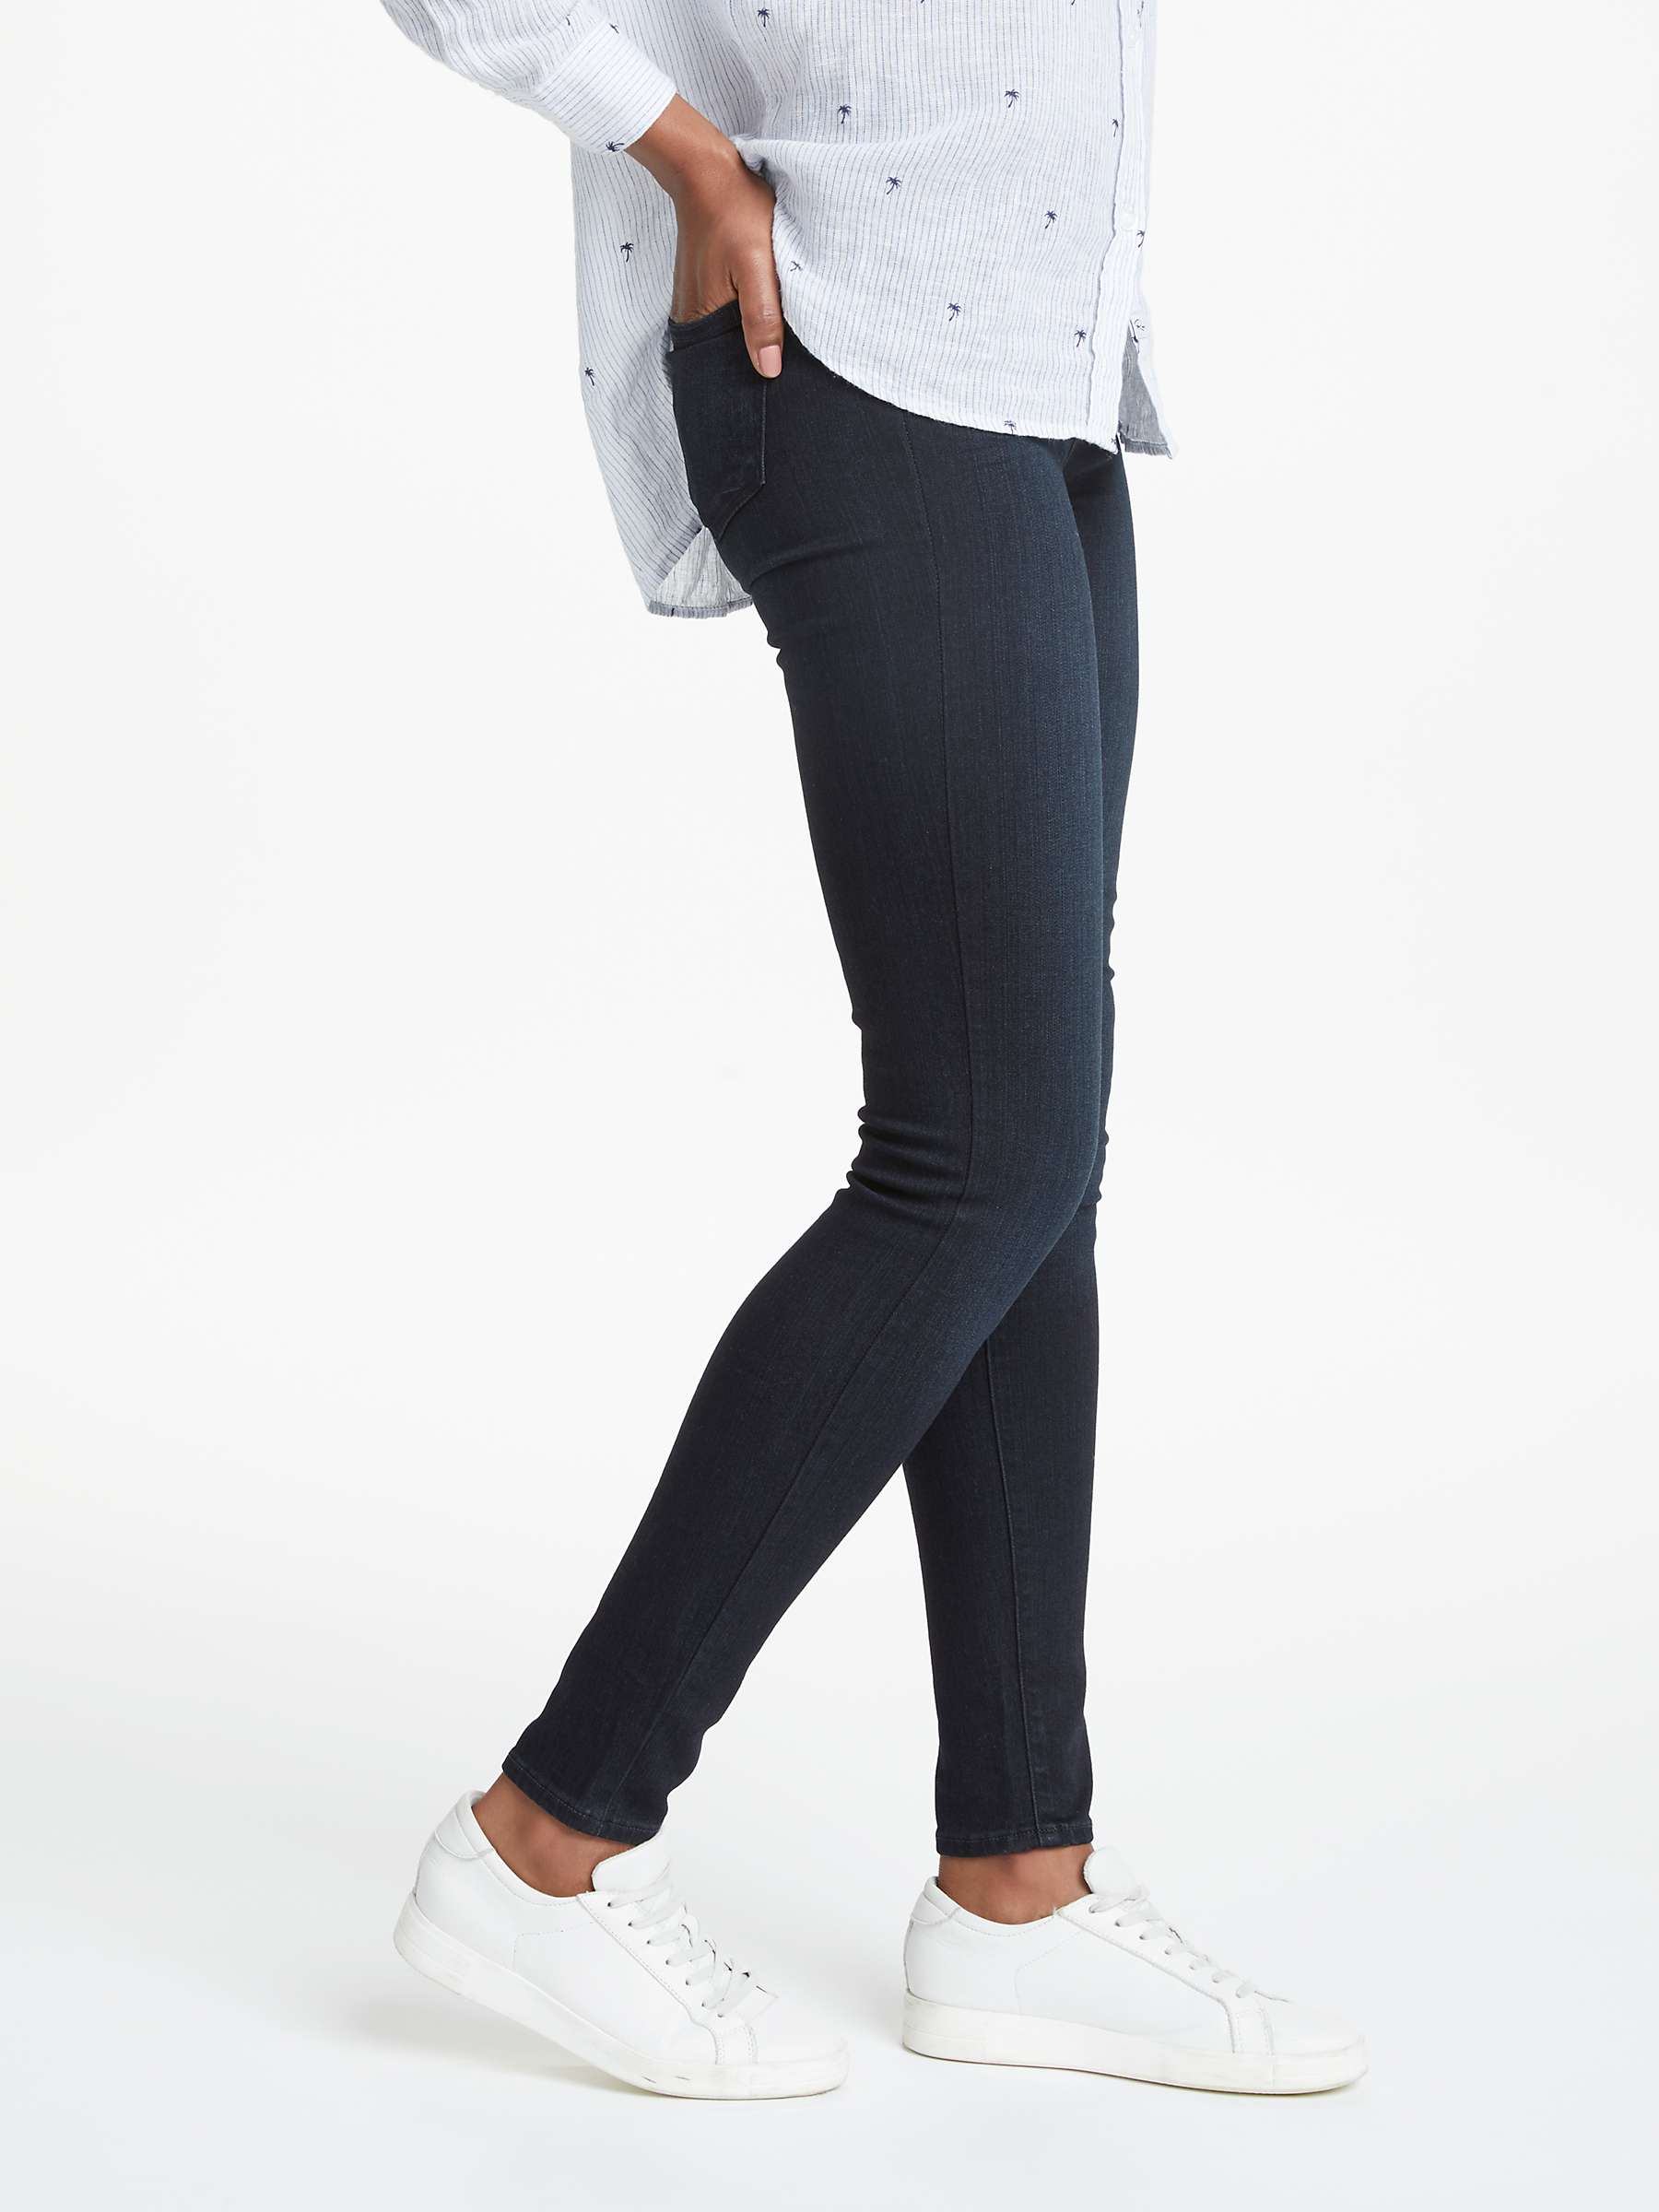 Buy PAIGE Margot High Rise Ultra Skinny Jeans, Tonal Mona Online at johnlewis.com